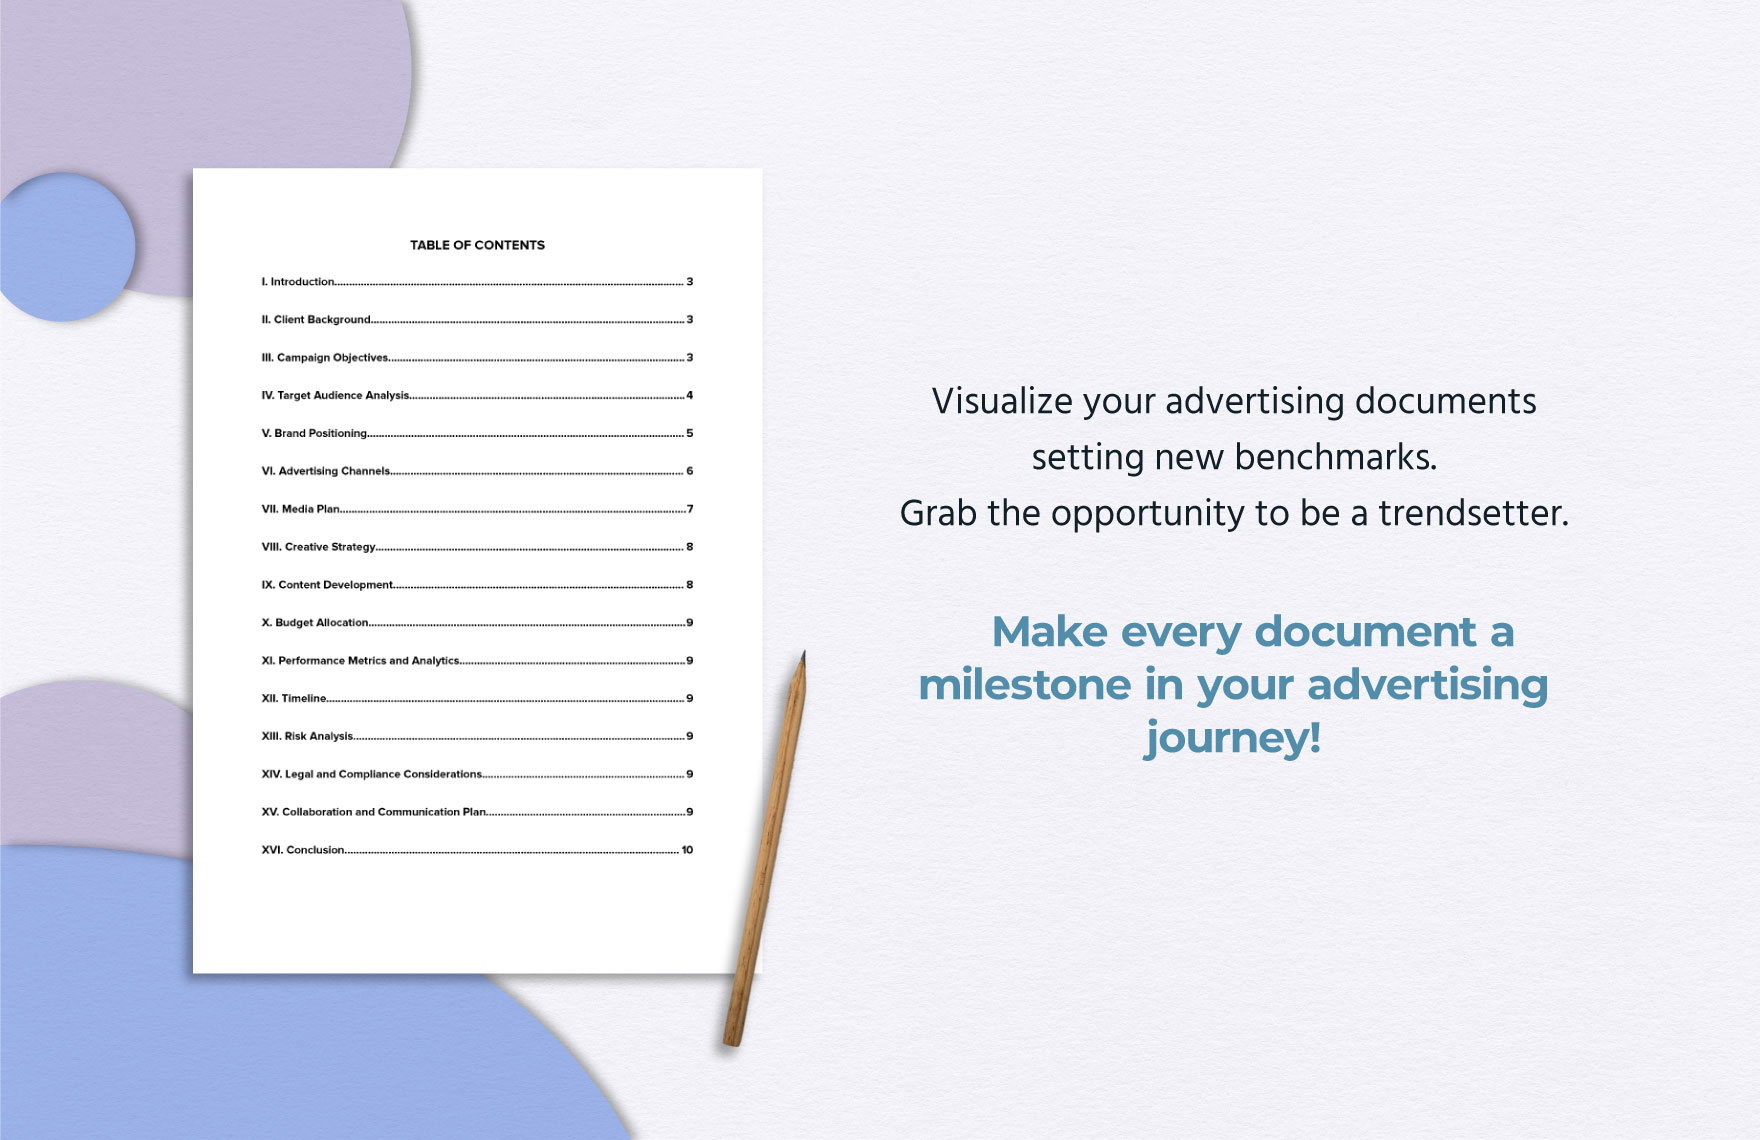 Client Customized Advertising Solution Template